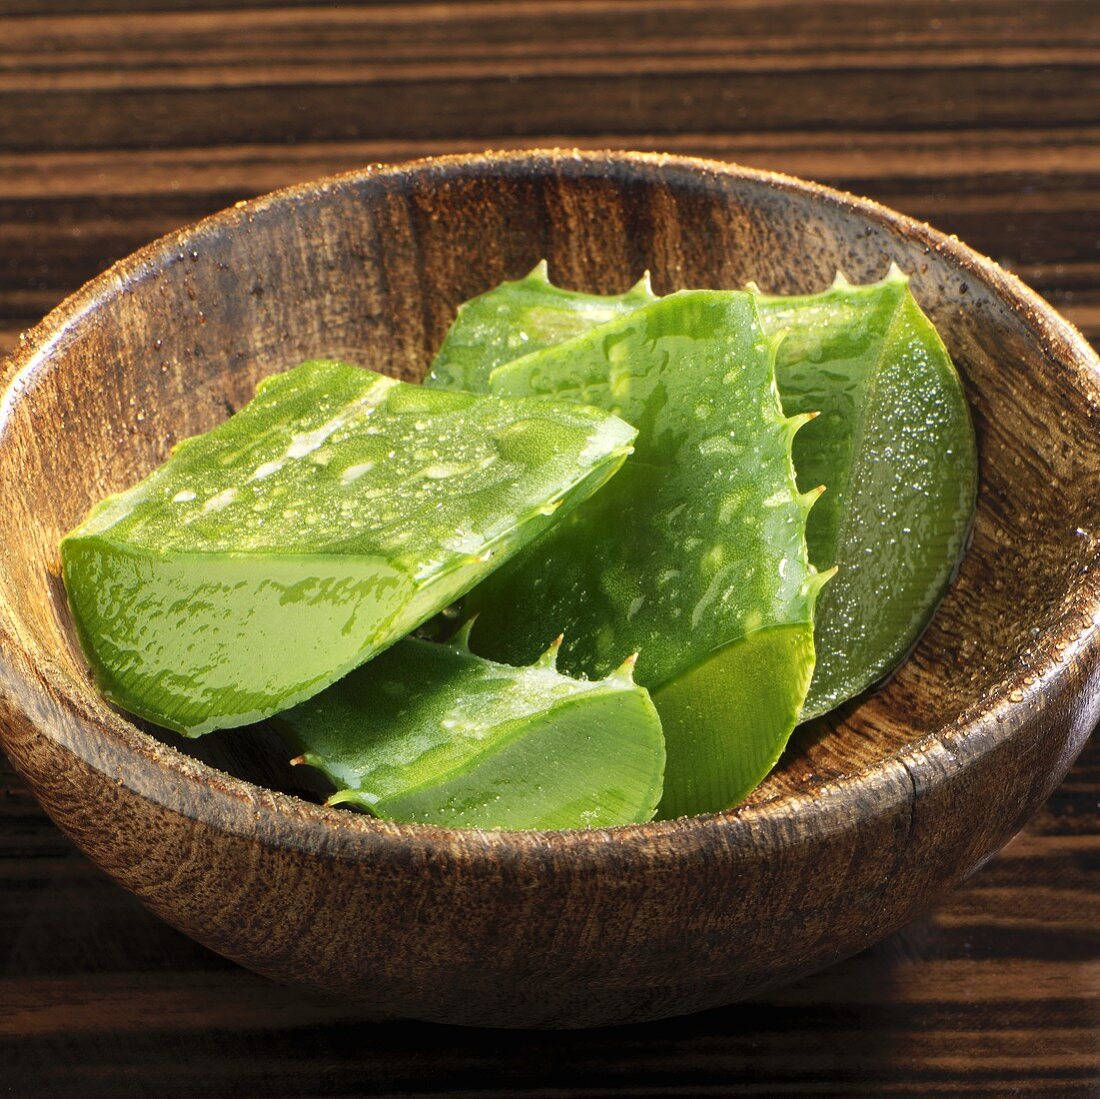 Pieces of Aloe vera leaves in wooden bowl